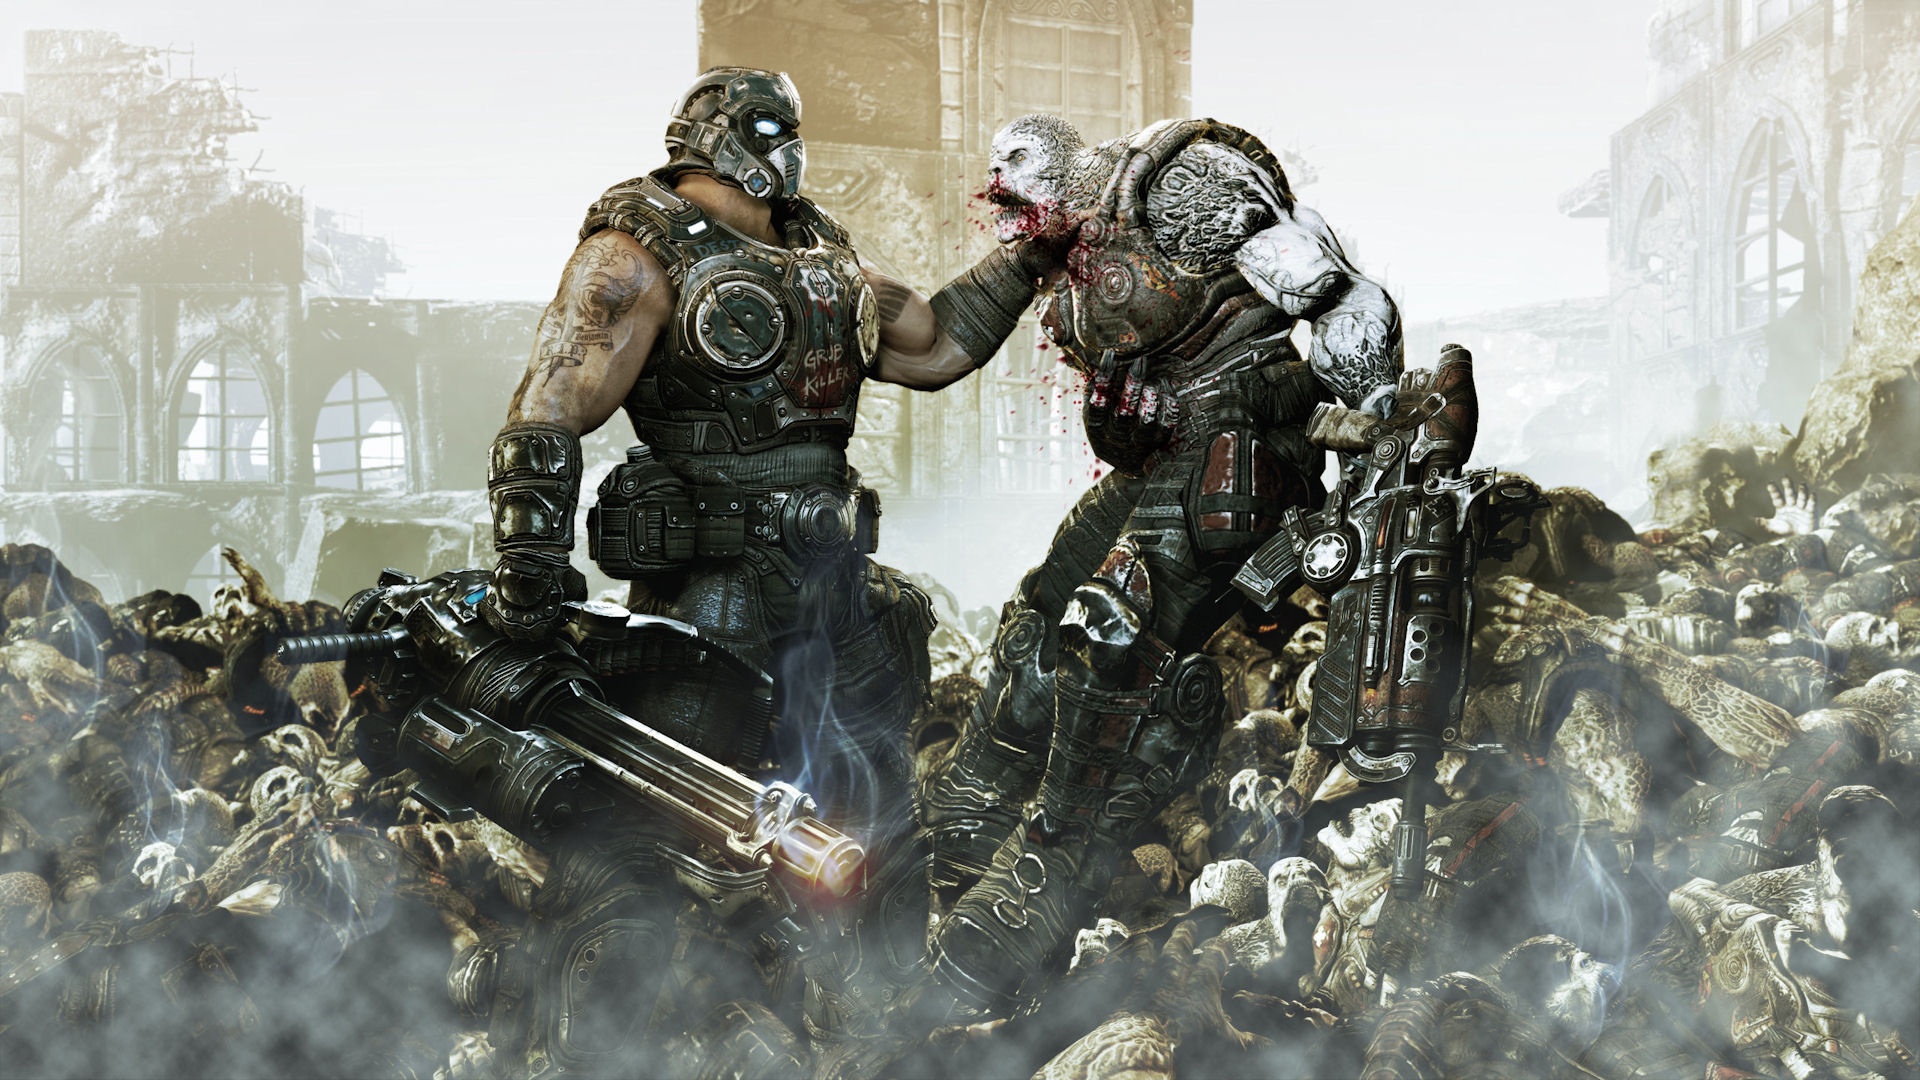 Gears of War For Xbox One: New Gameplay Footage Leaked, Clearly